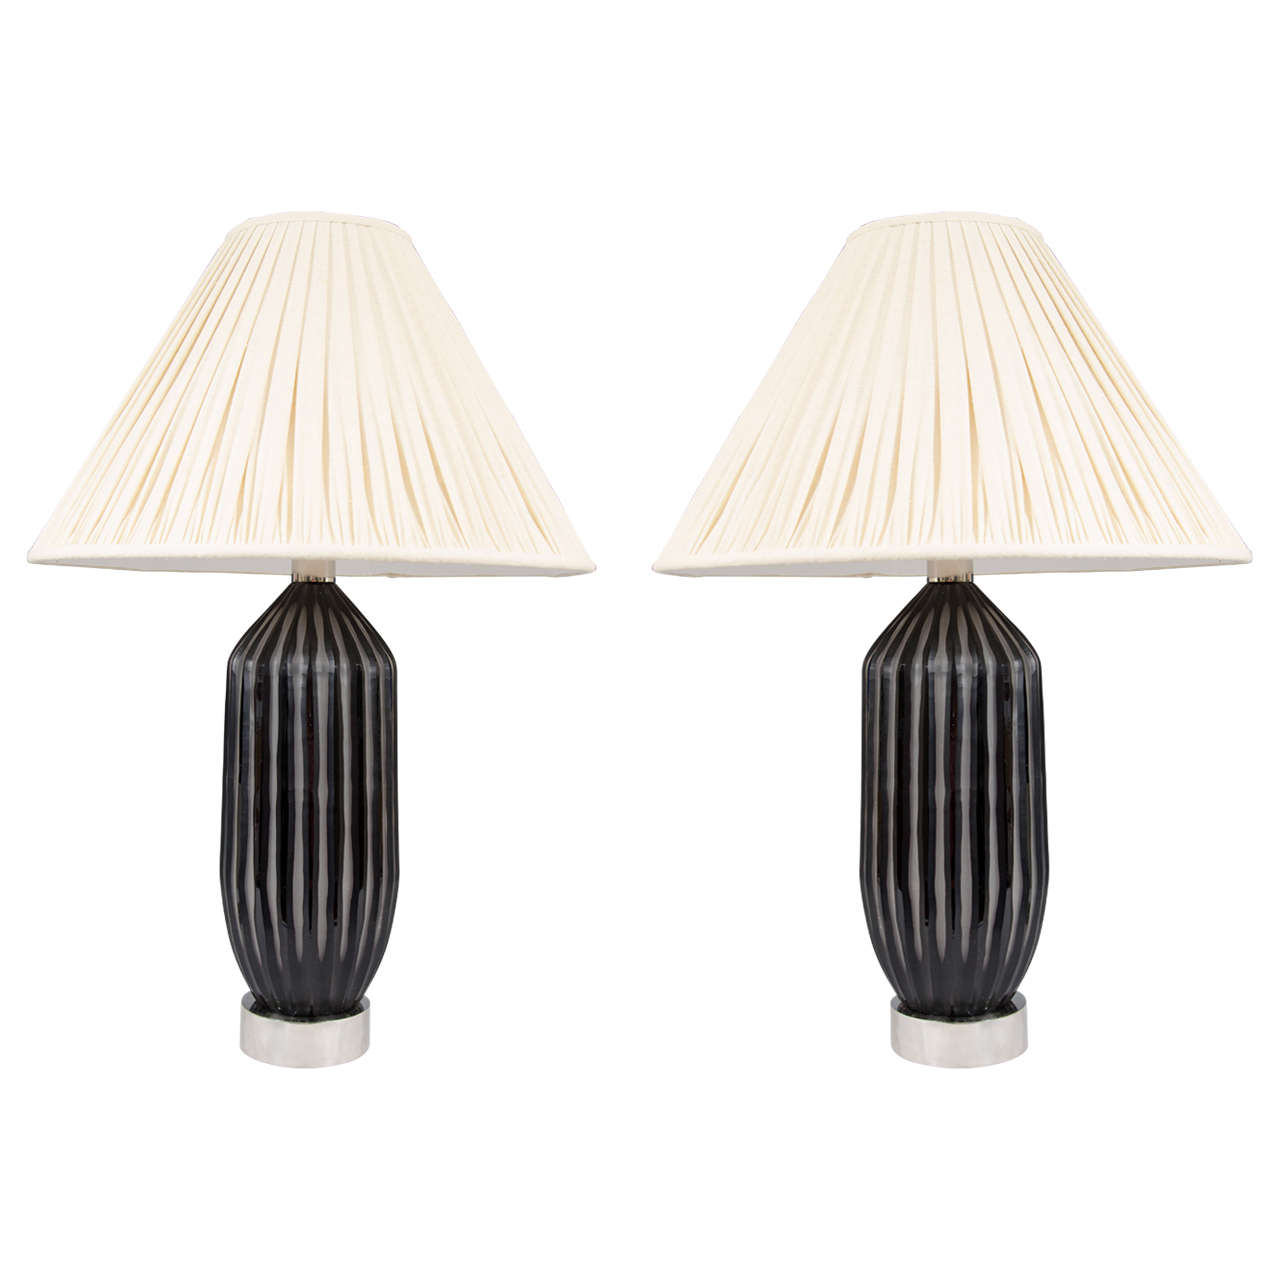 A Contemporary Pair of Art Glass Lamps with Black Stripe Design